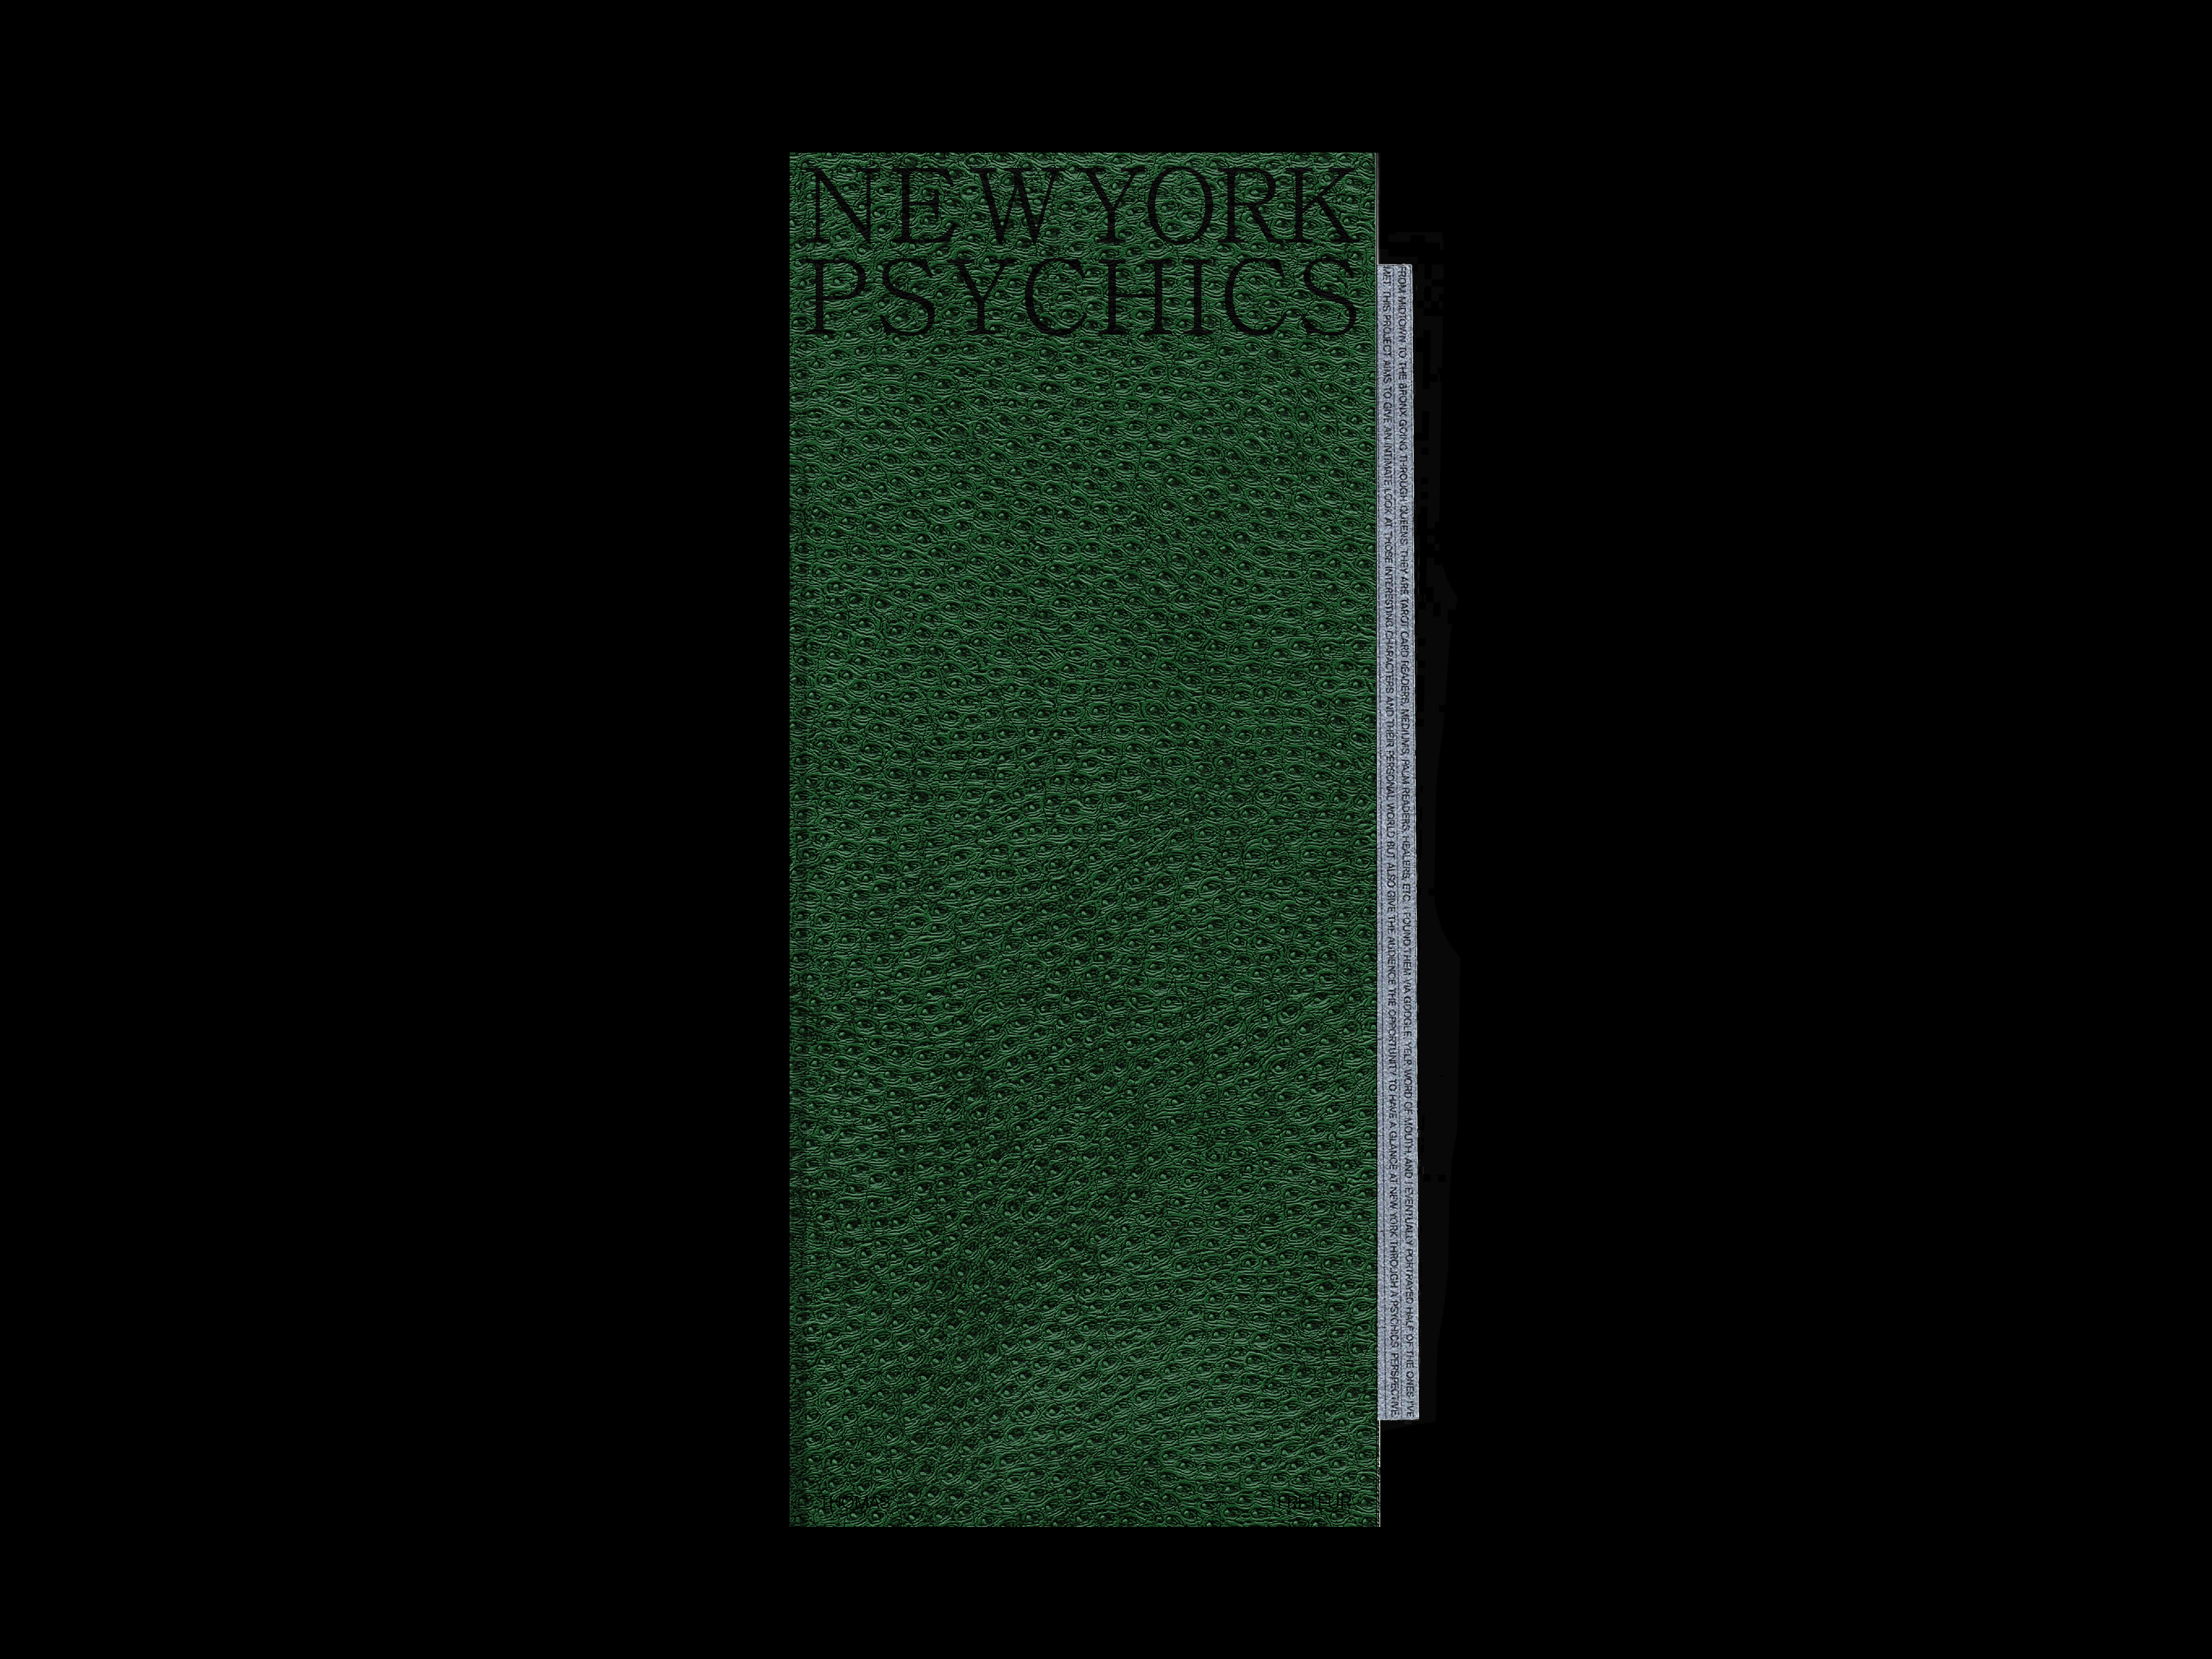 https://www.julienbaiamonte.com/content/1-projects/new-york-psychics/nyc_psychics_scan004_baiamonte_251019.png.png